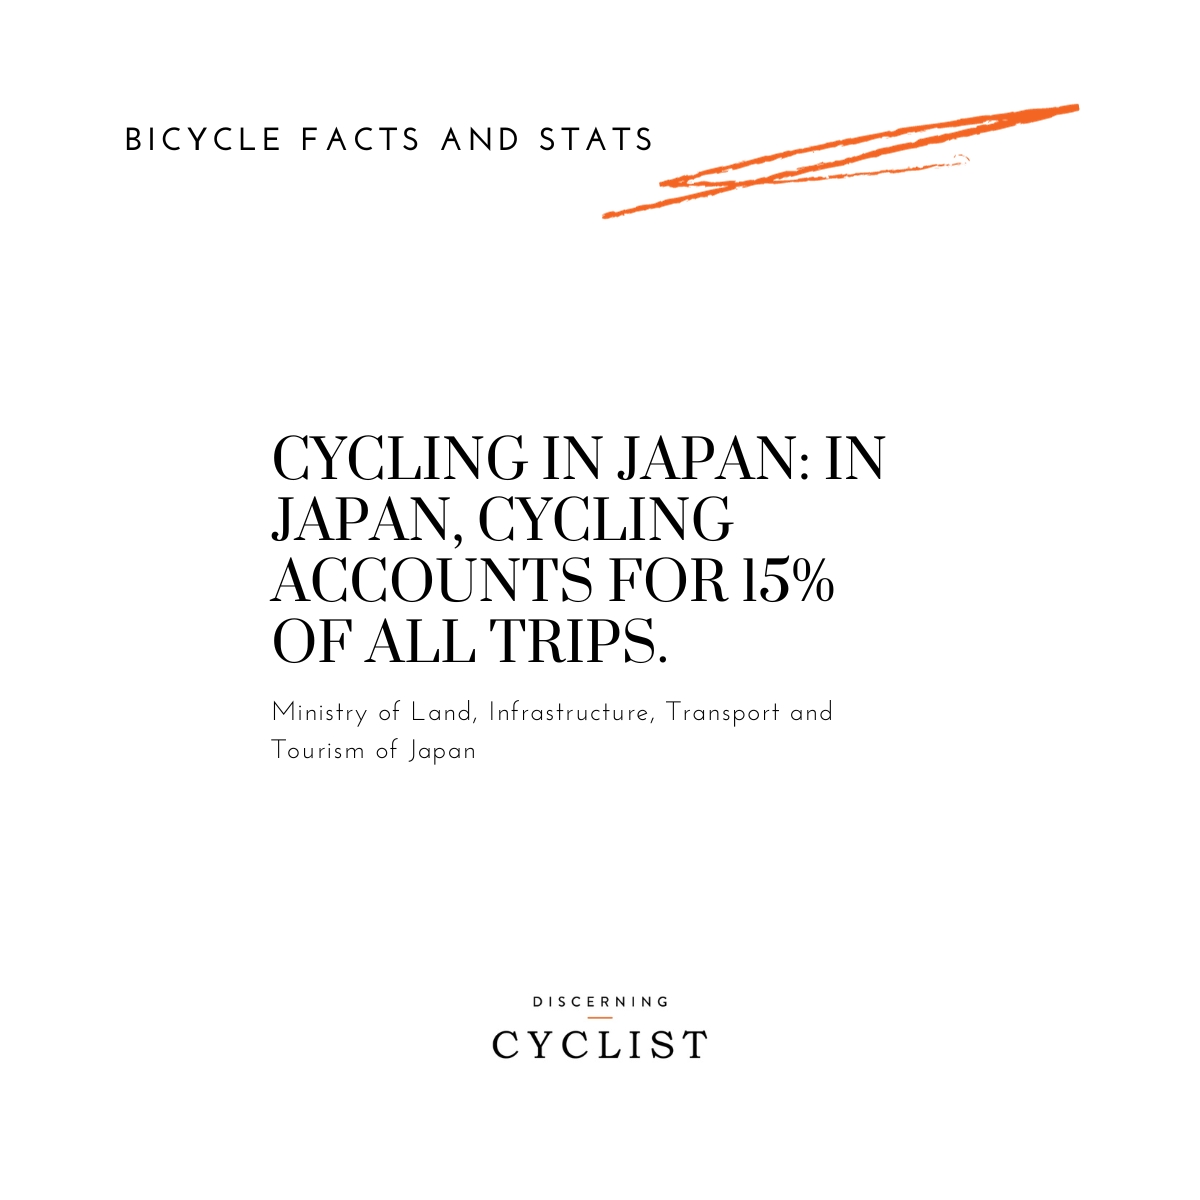 Cycling in Japan: In Japan, cycling accounts for 15% of all trips.